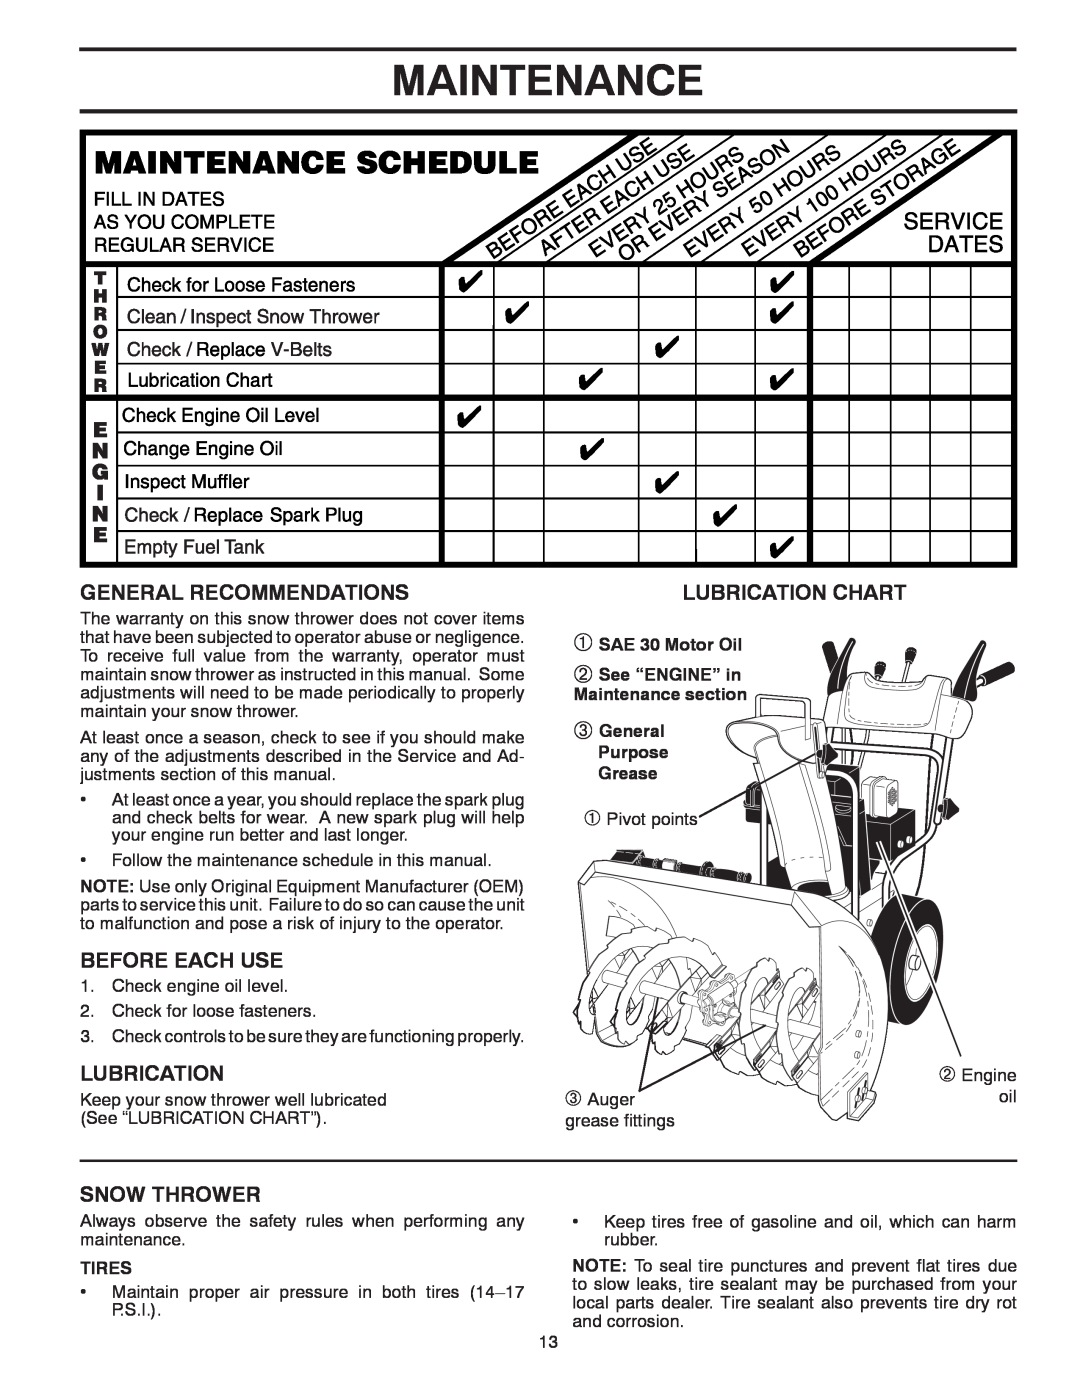 Poulan 96192004200, 436132 Maintenance, General Recommendations, Before Each Use, Snow Thrower, Lubrication Chart 